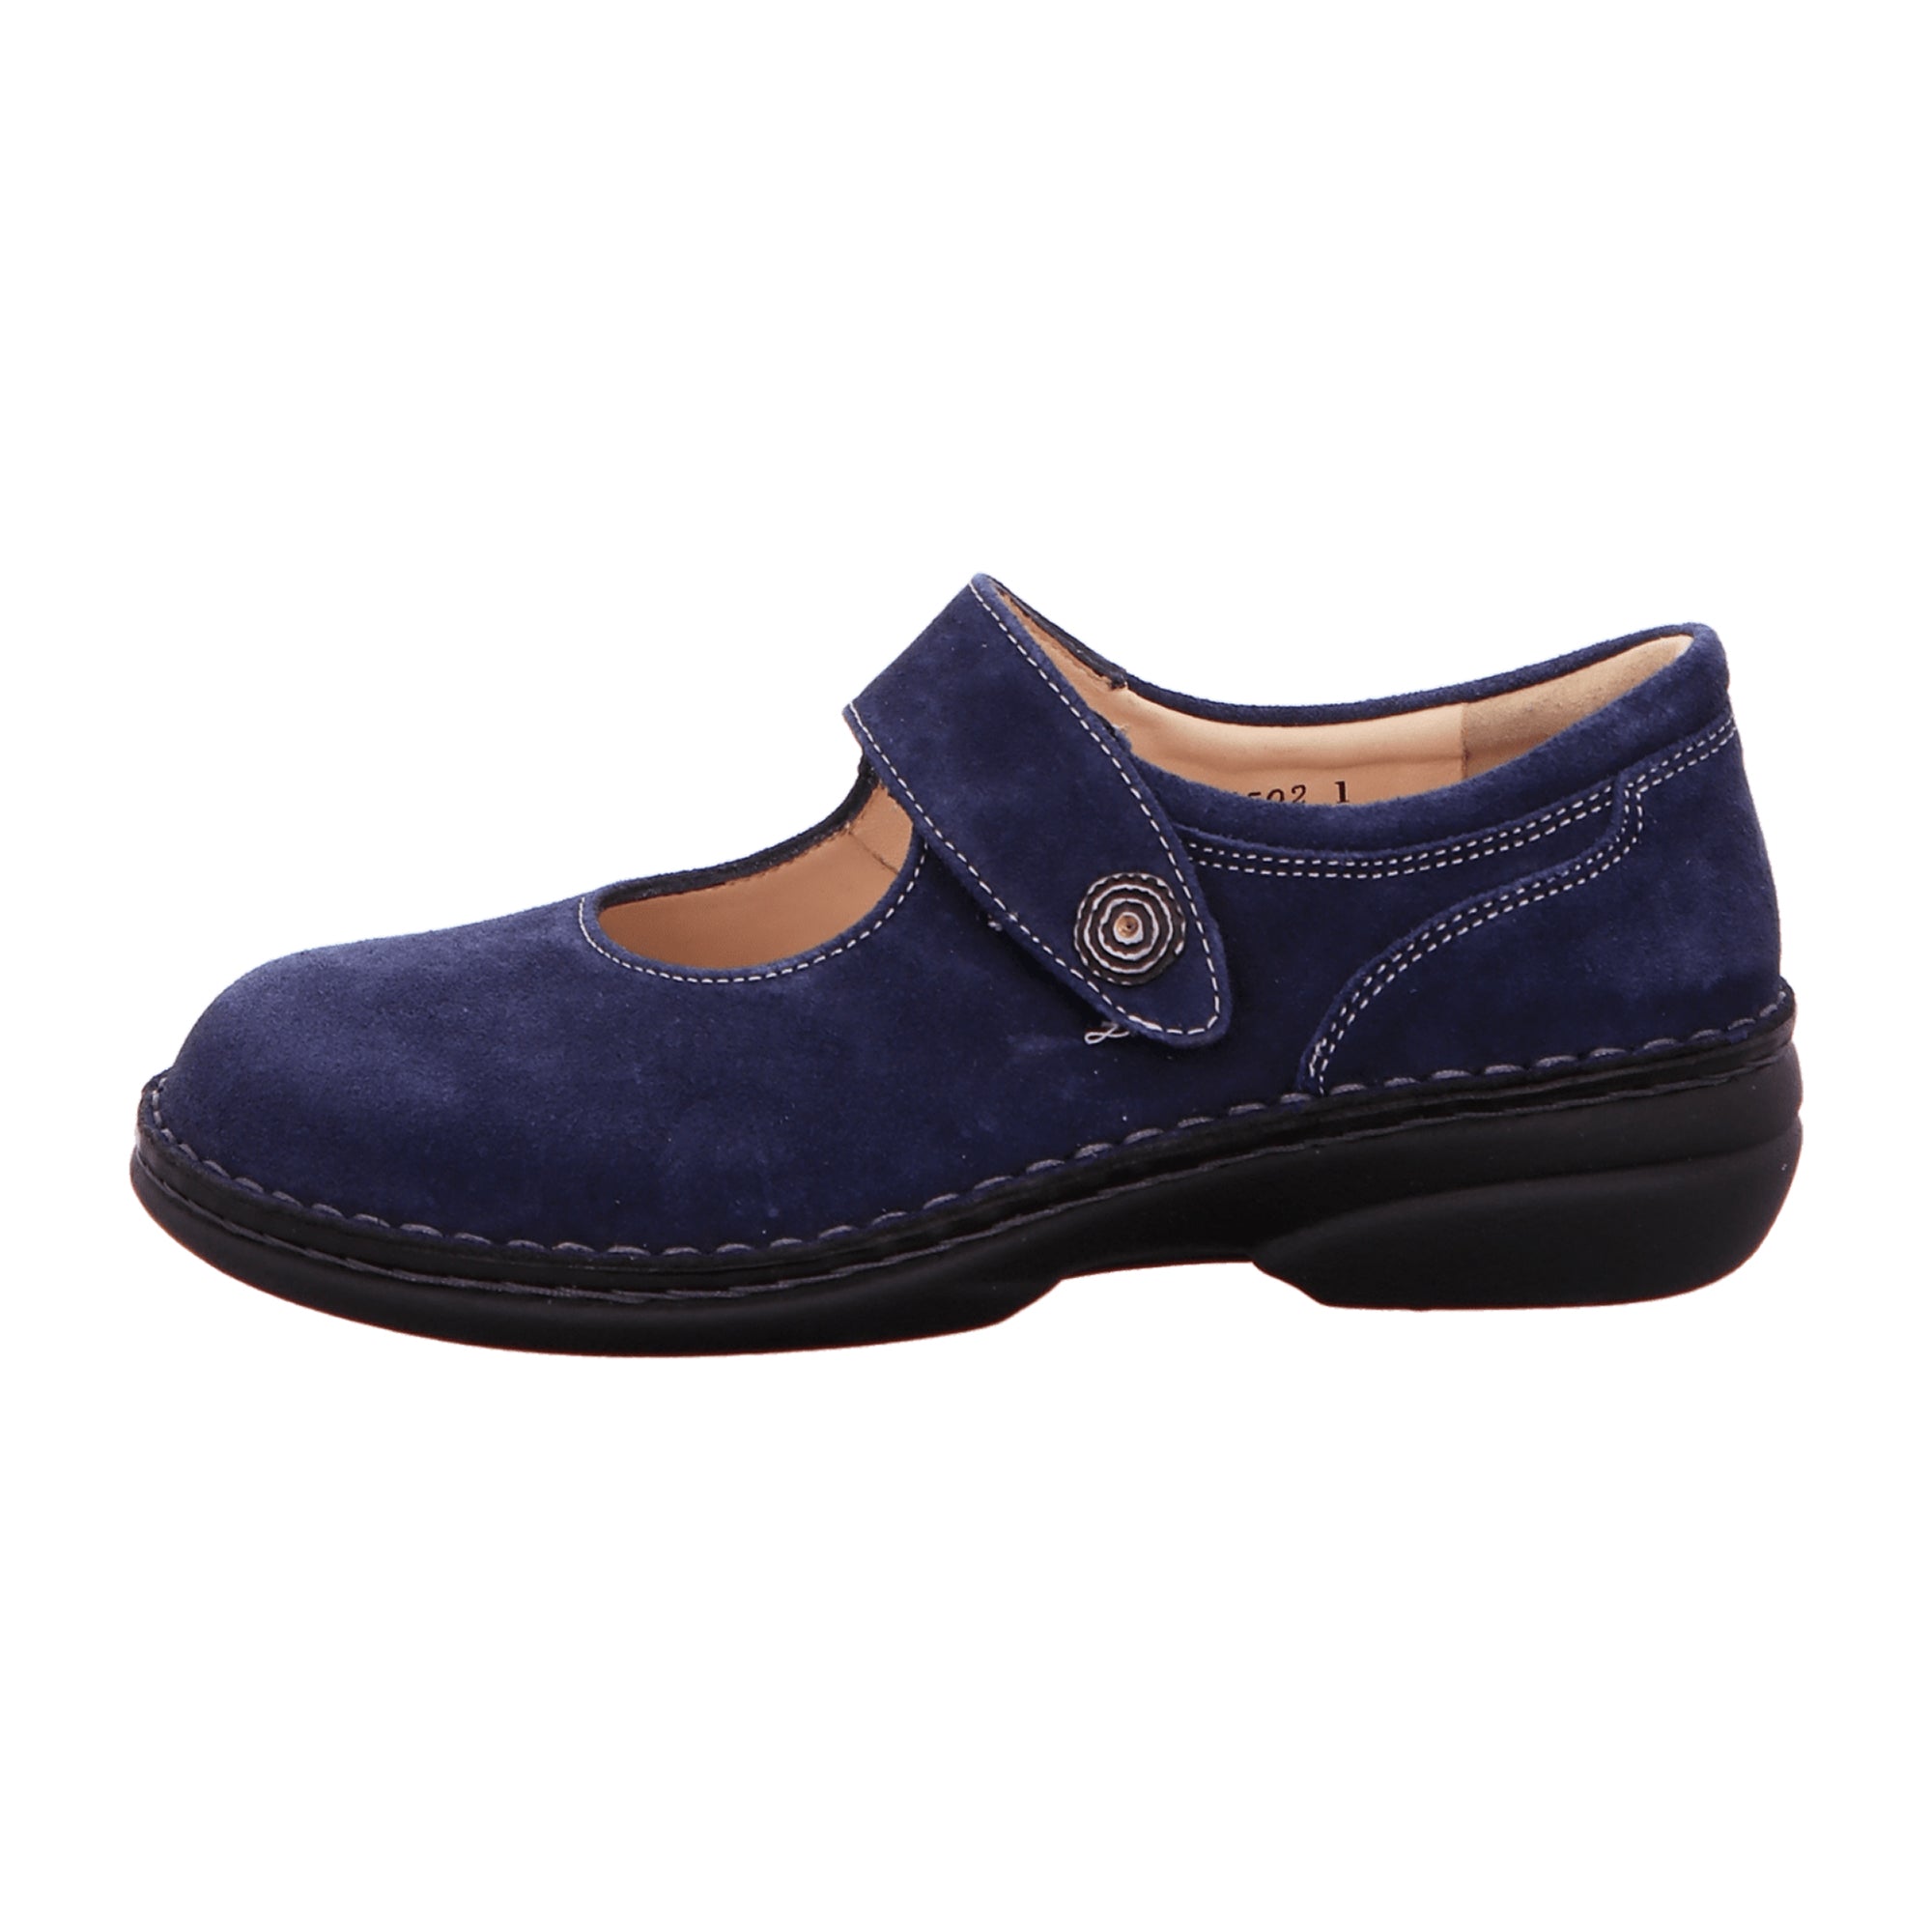 Finn Comfort Laval Women's Slipper - Indigo Blue Comfortable Leather Slip-On Shoe with Removable Insole